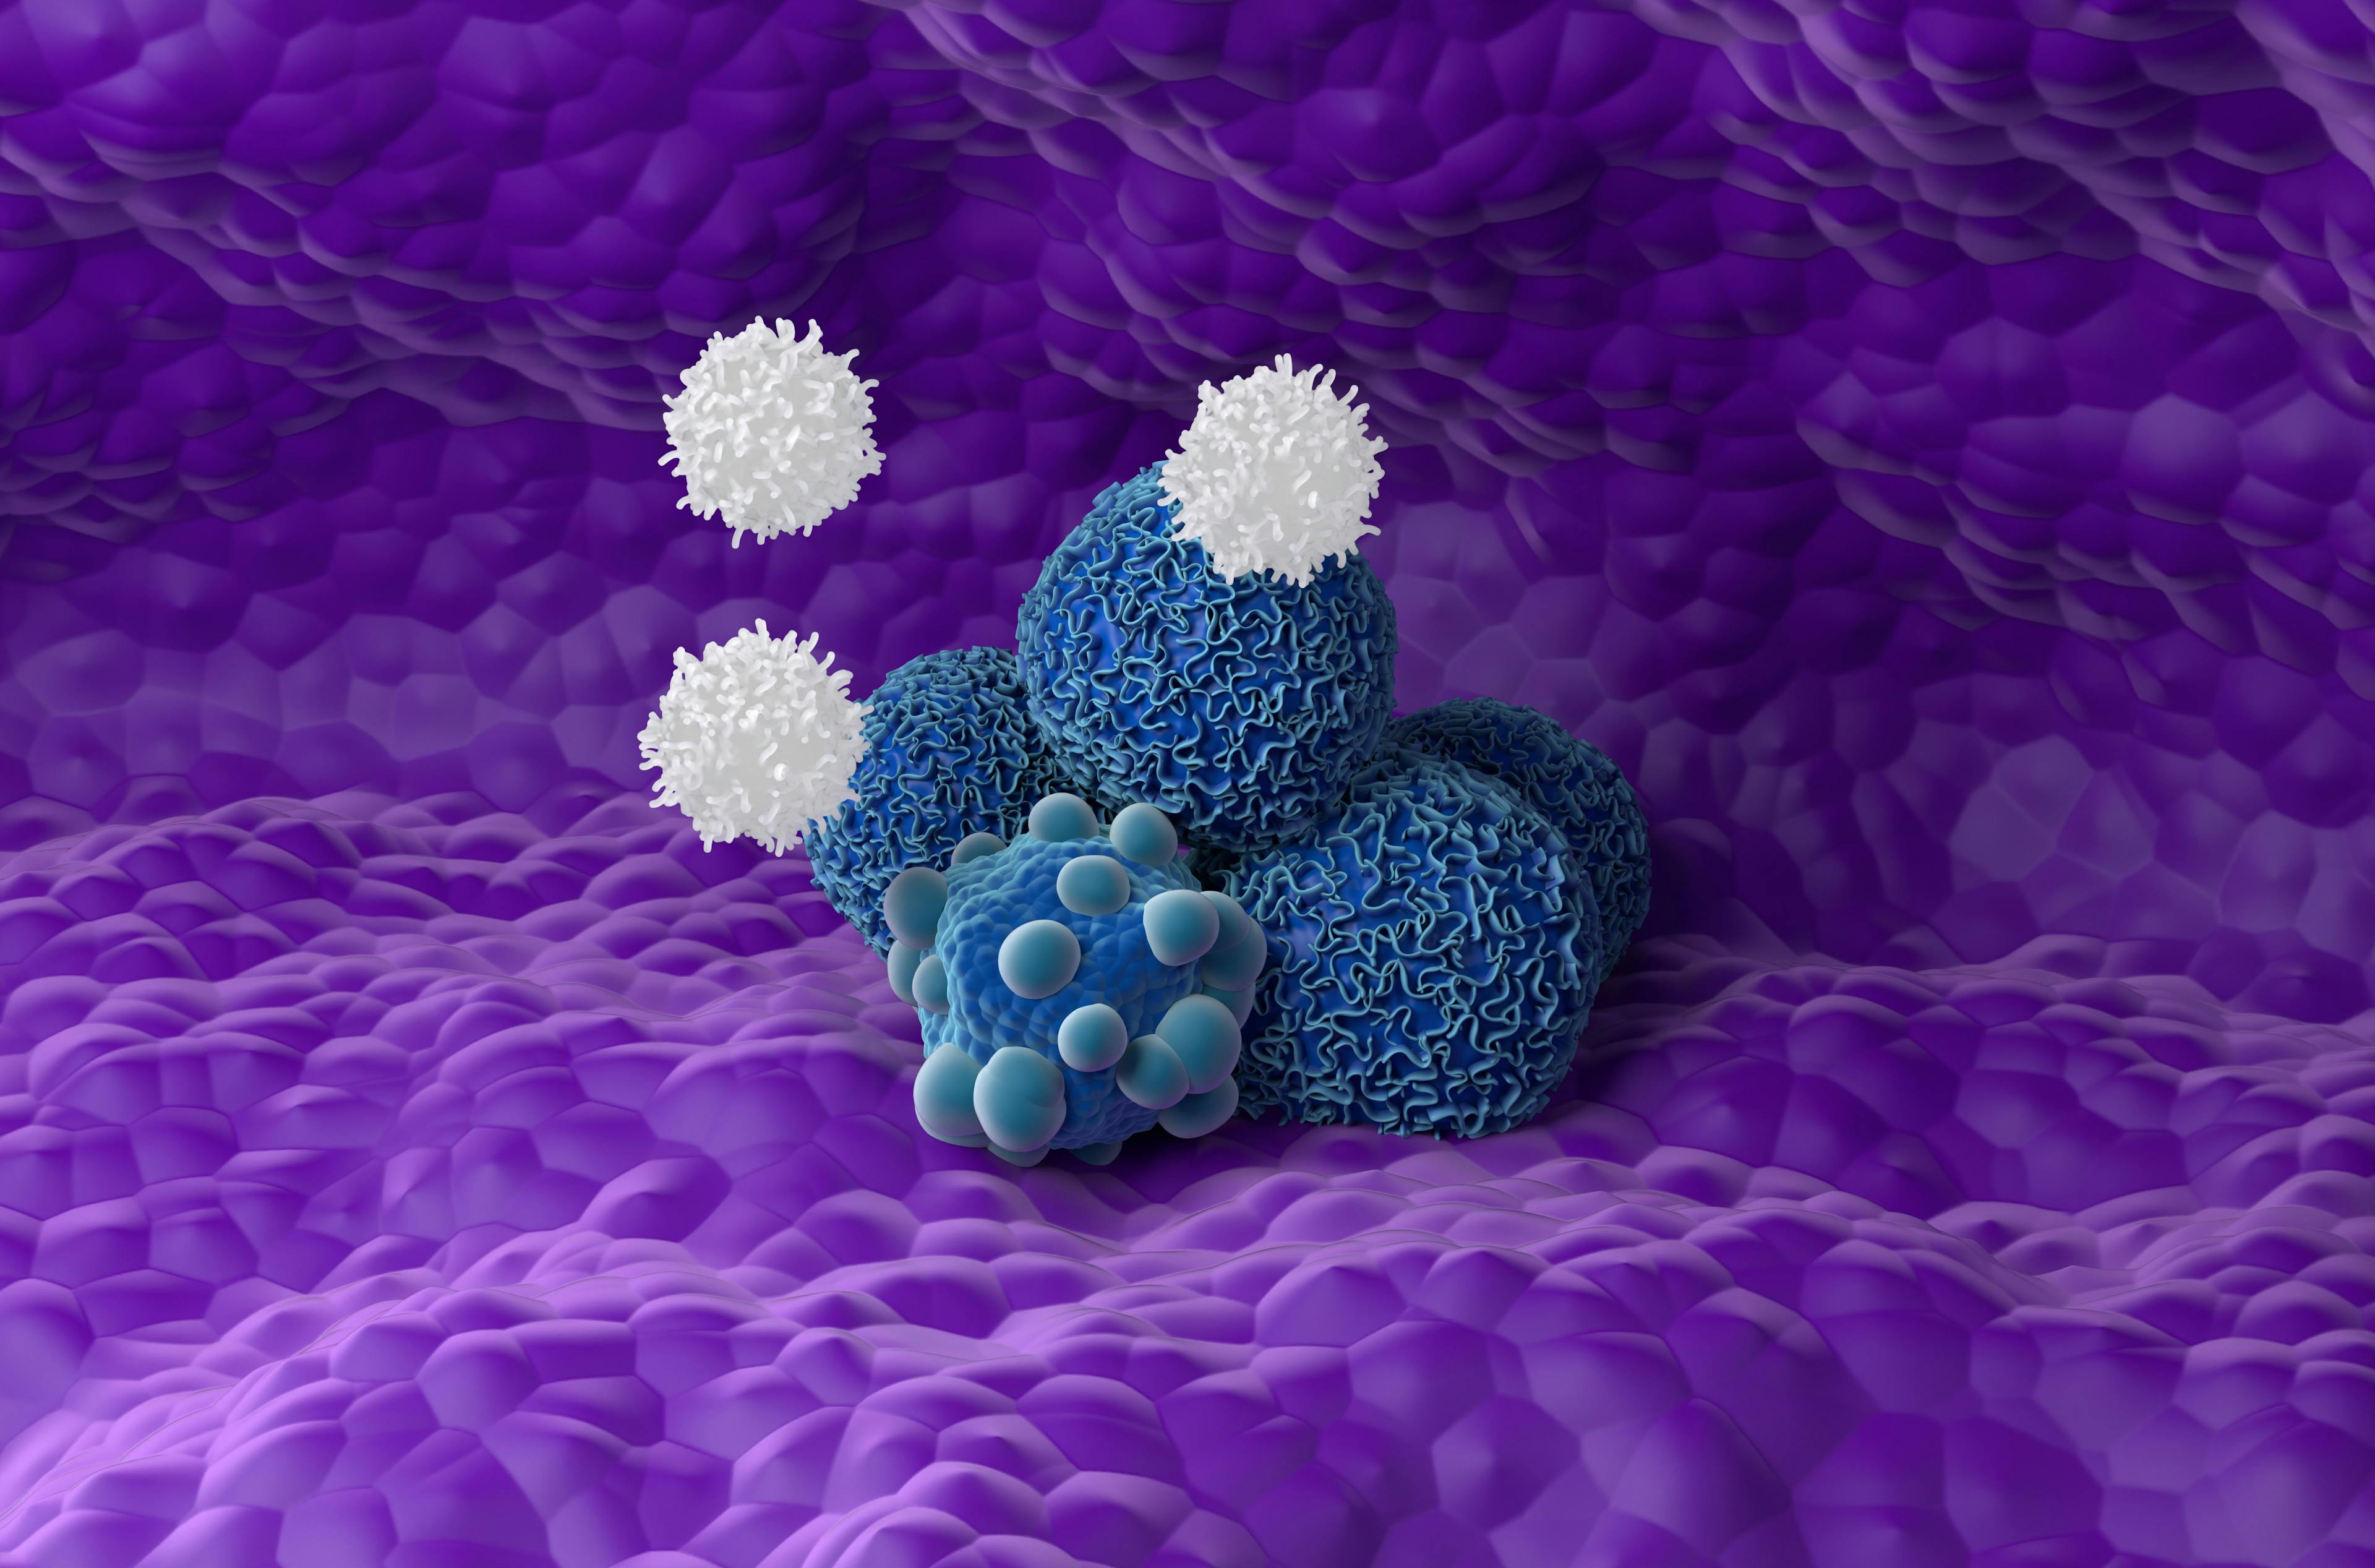 Activated t-cells attack pancreatic cancer cells group © LASZLO -www.stock.adobe.com